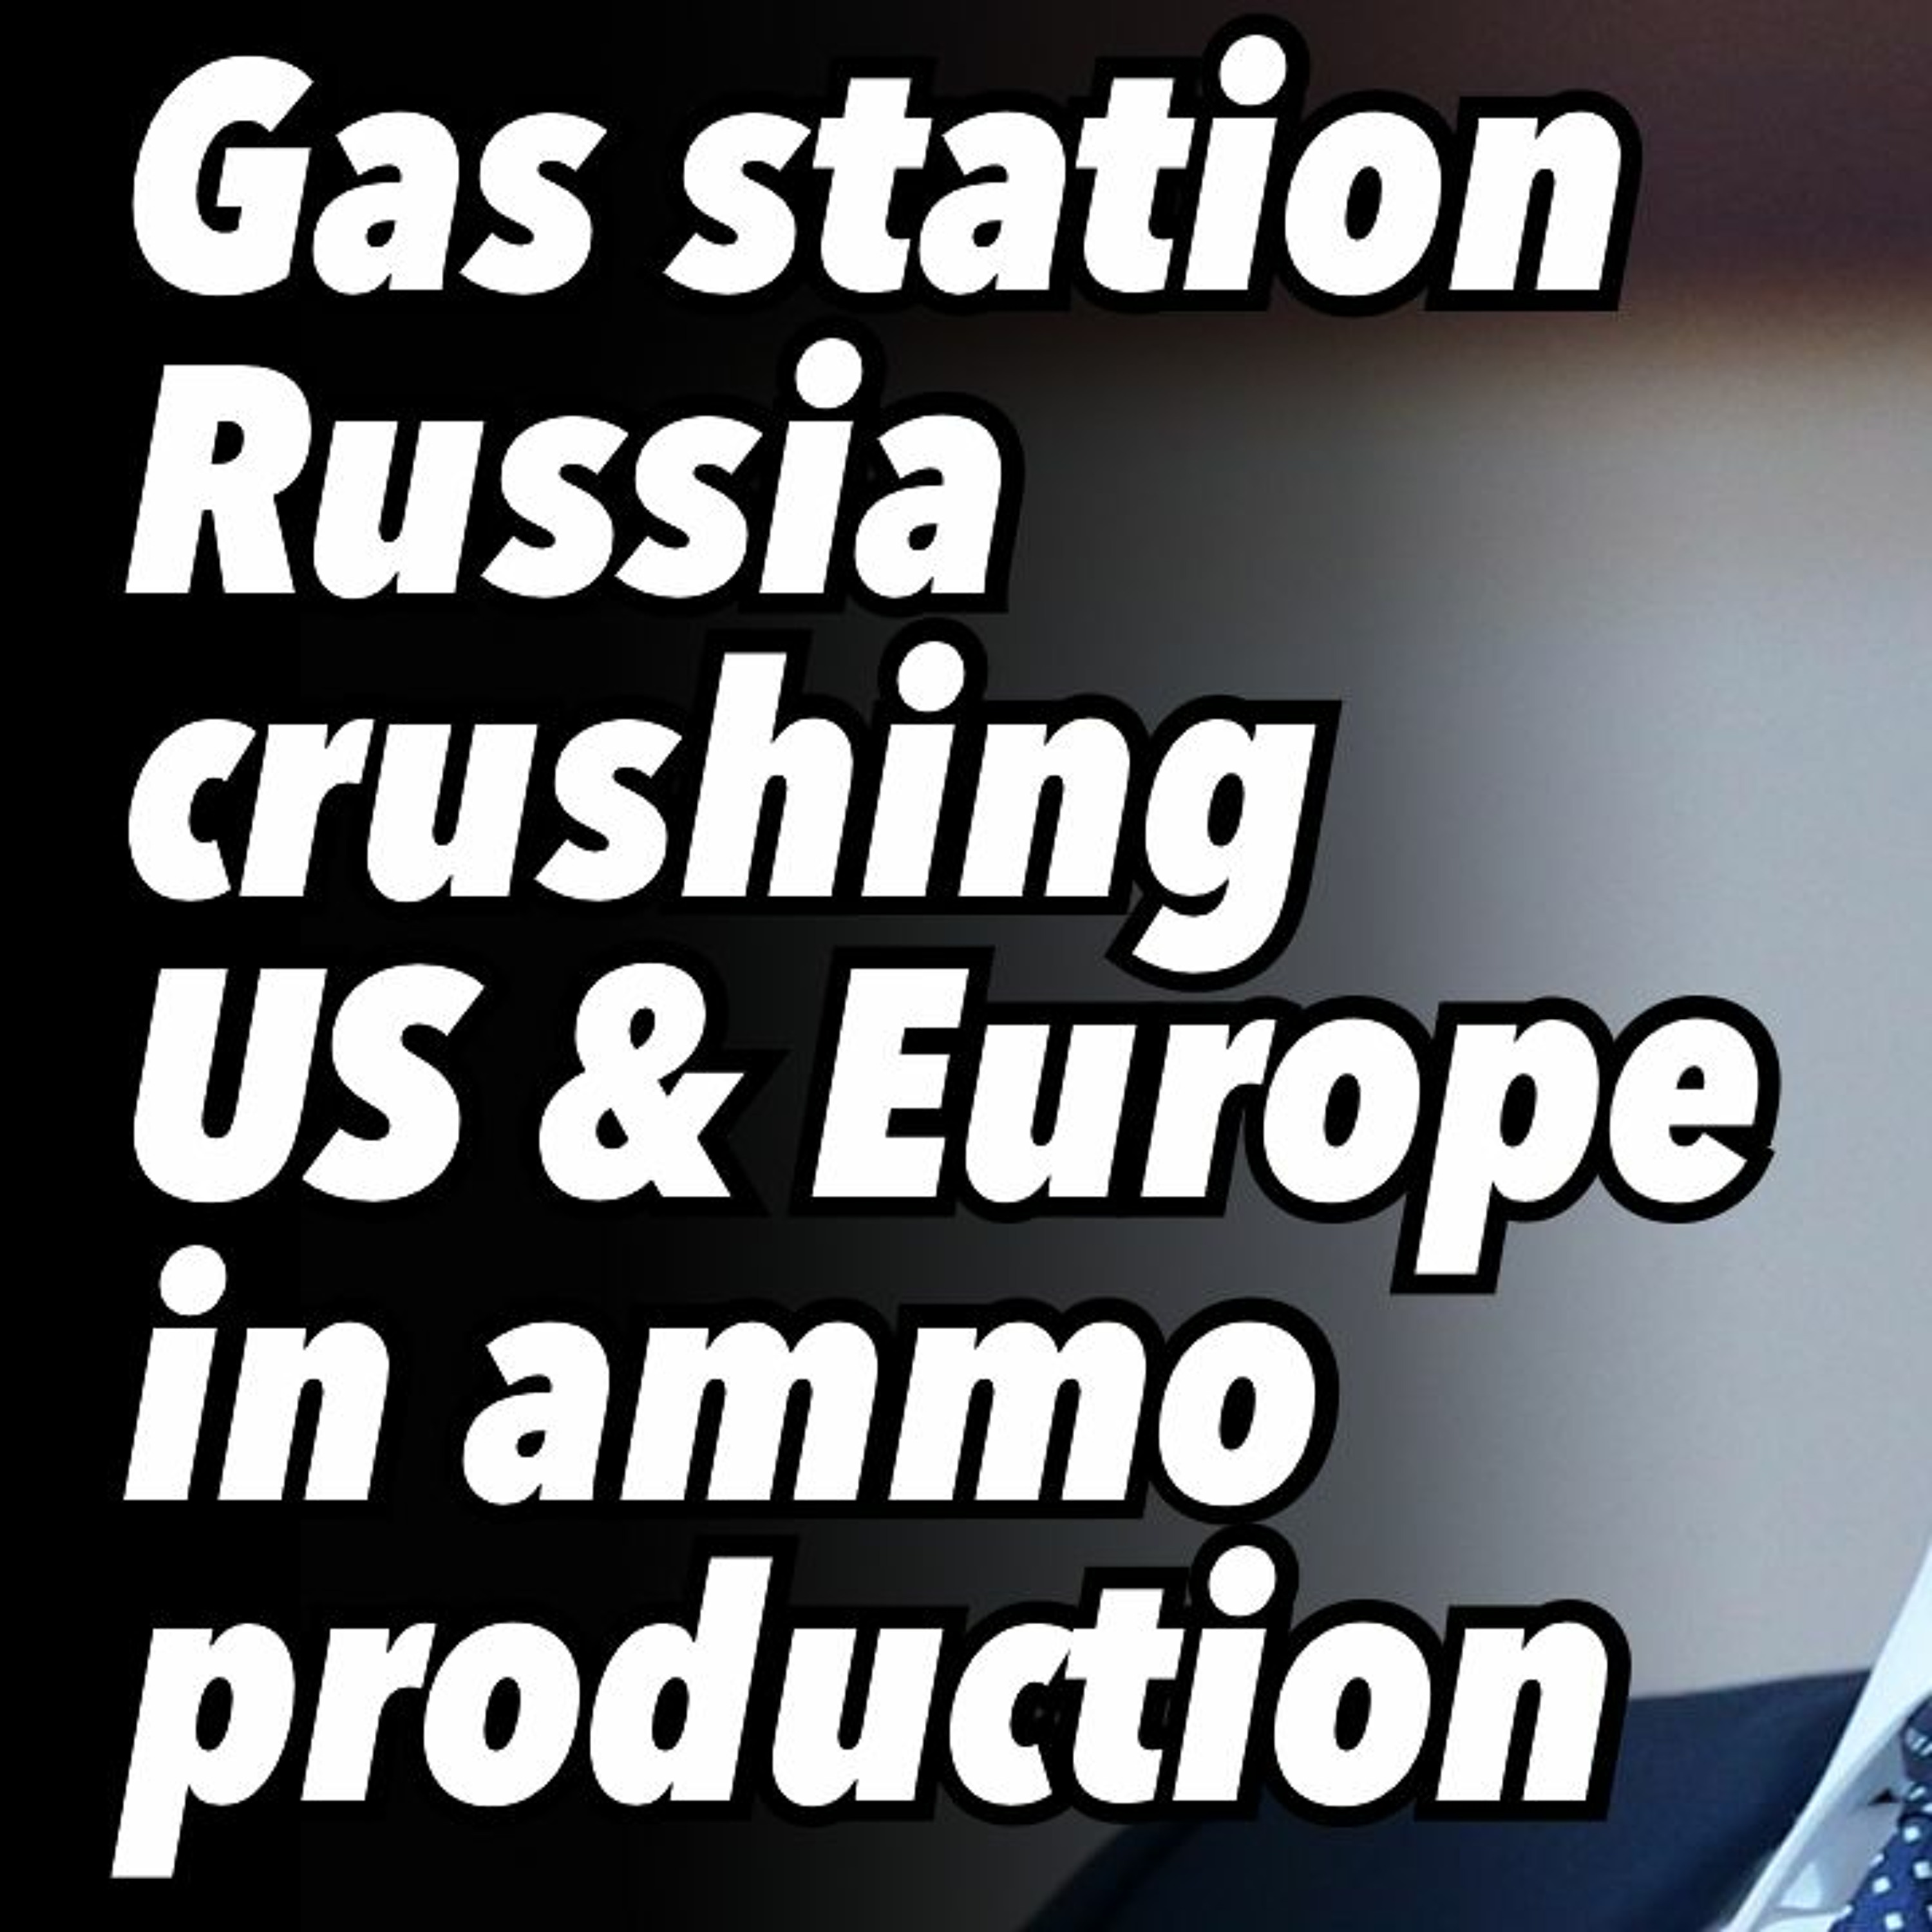 CNN admits; Gas station Russia crushing US & Europe in ammo production